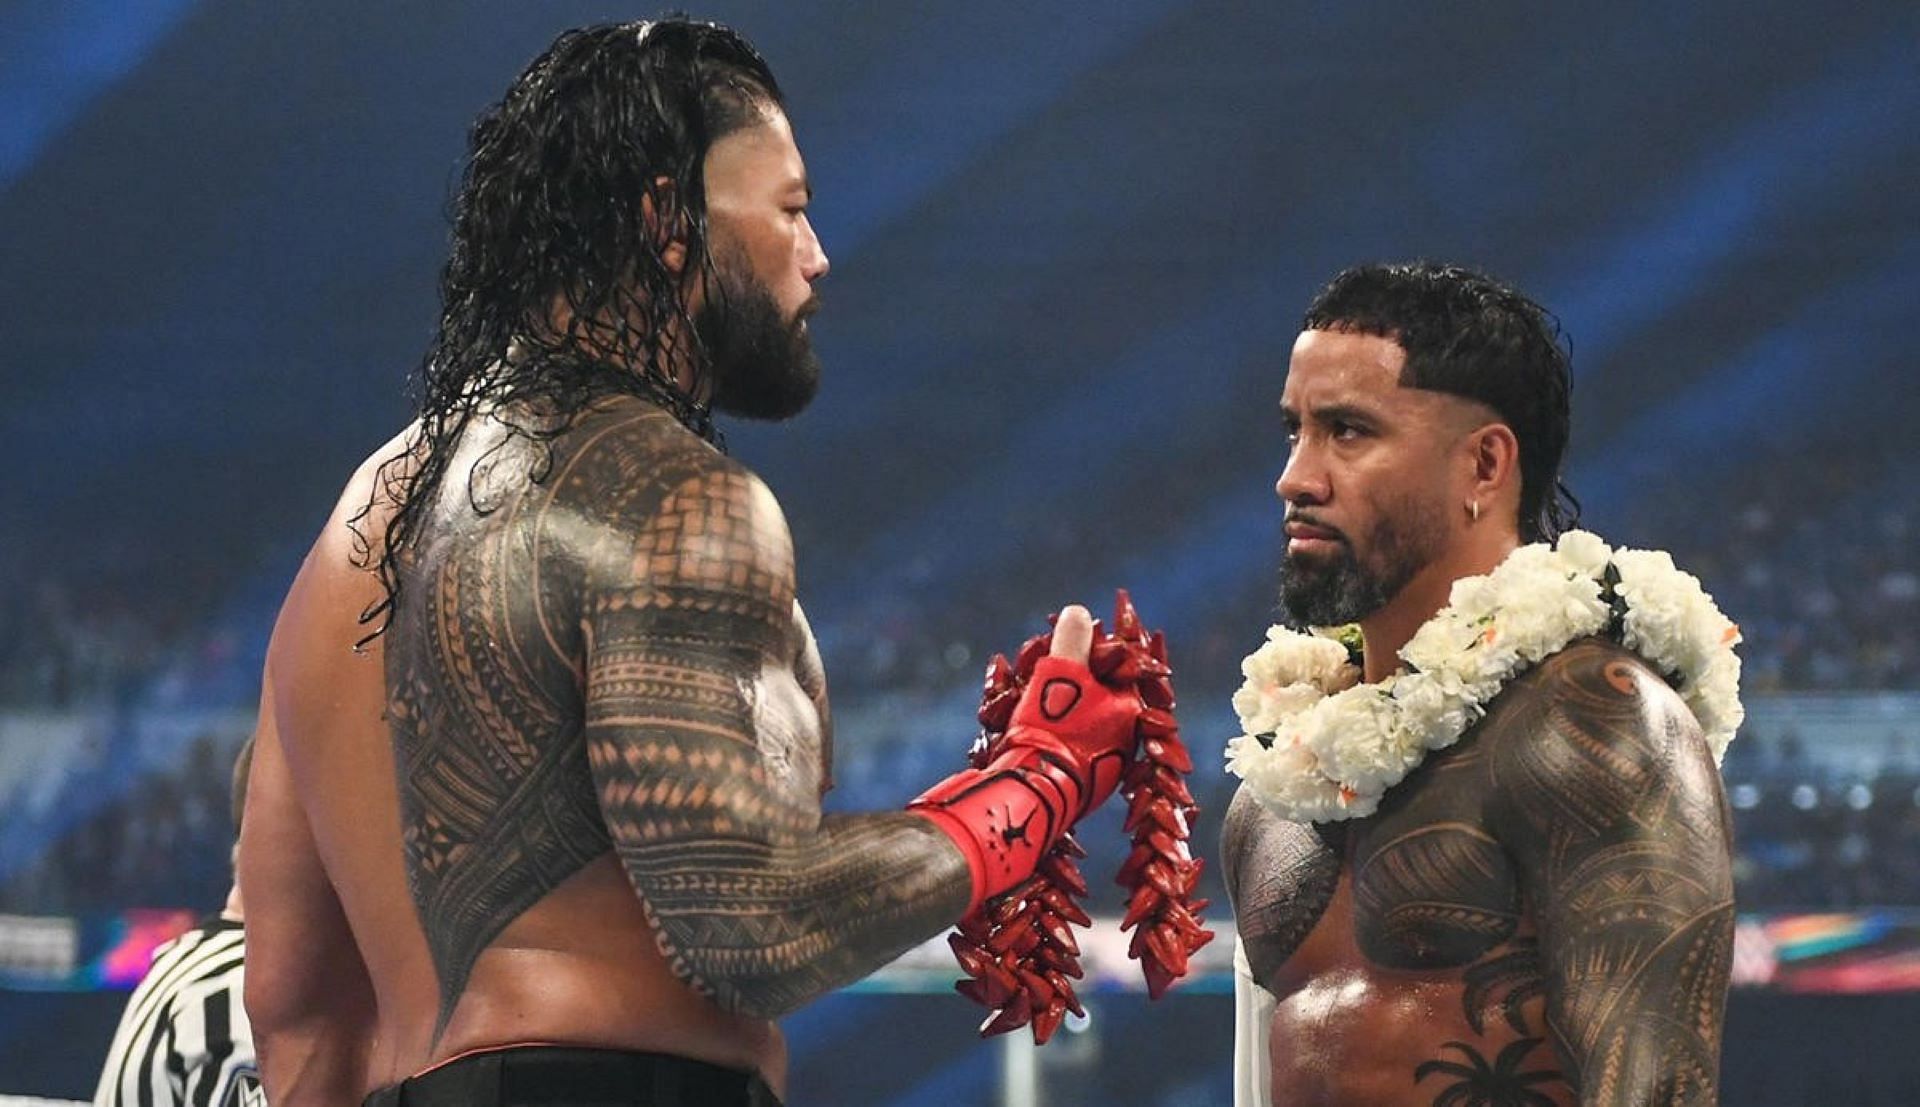 The Bloodline angle has relied heavily on the traditions of the Samoan culture.